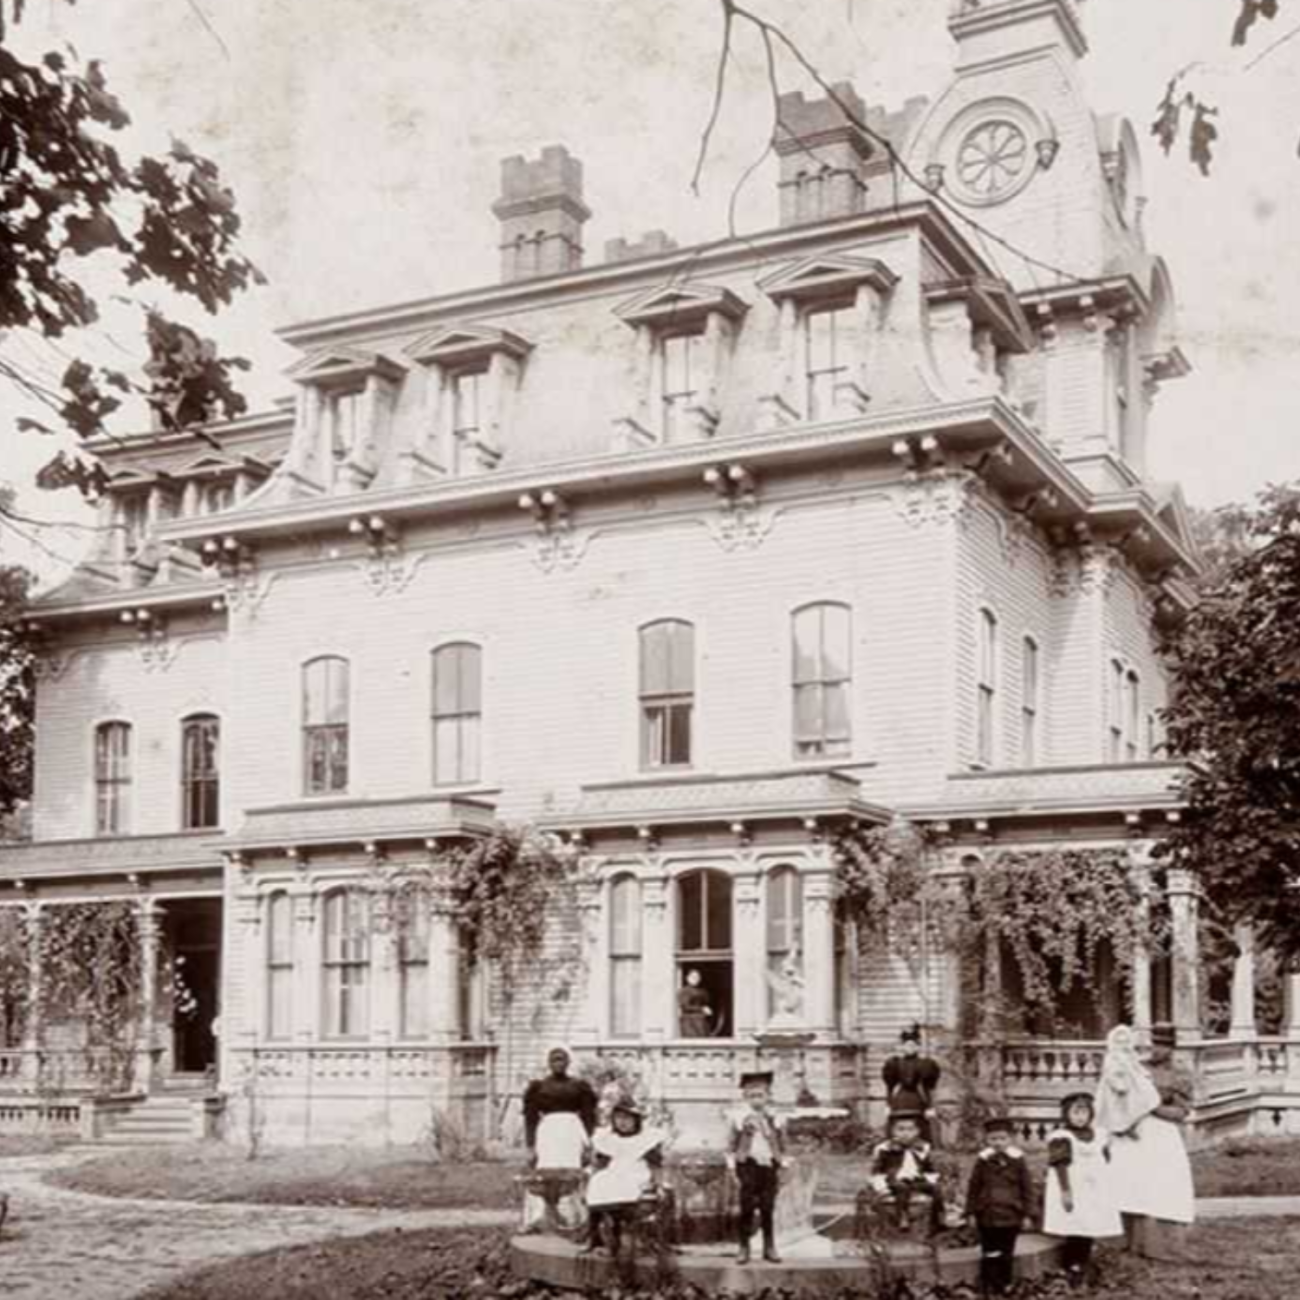 a black and white historic photo of a mansion, with a family sitting in the front lawn.